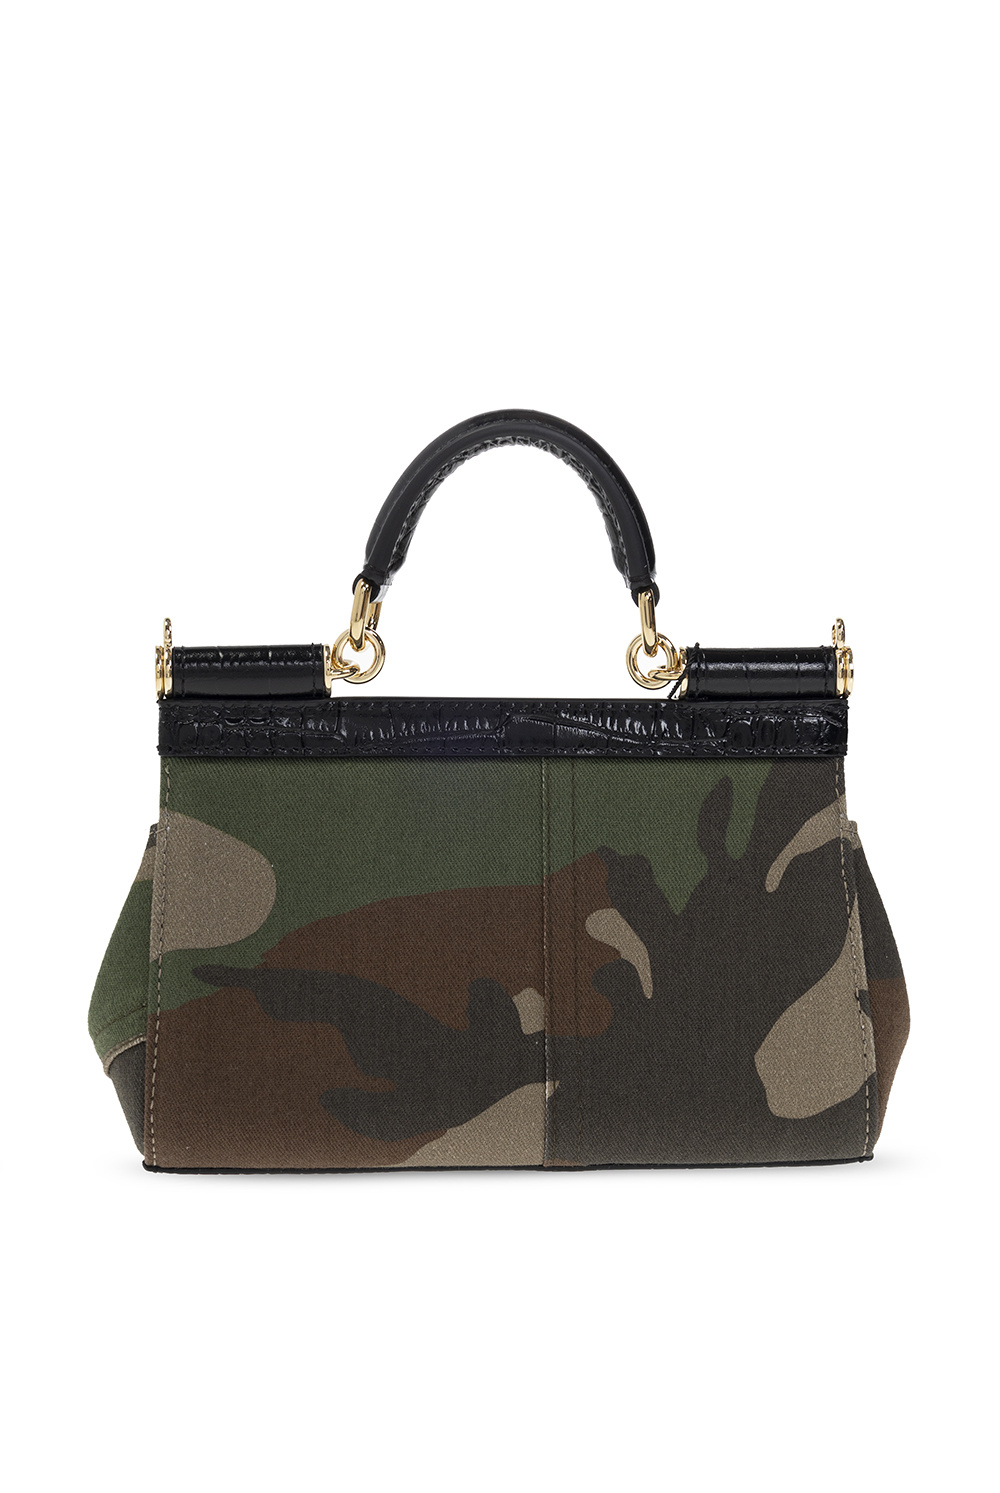 dolce & gabbana Sicily small shoulder bag available on